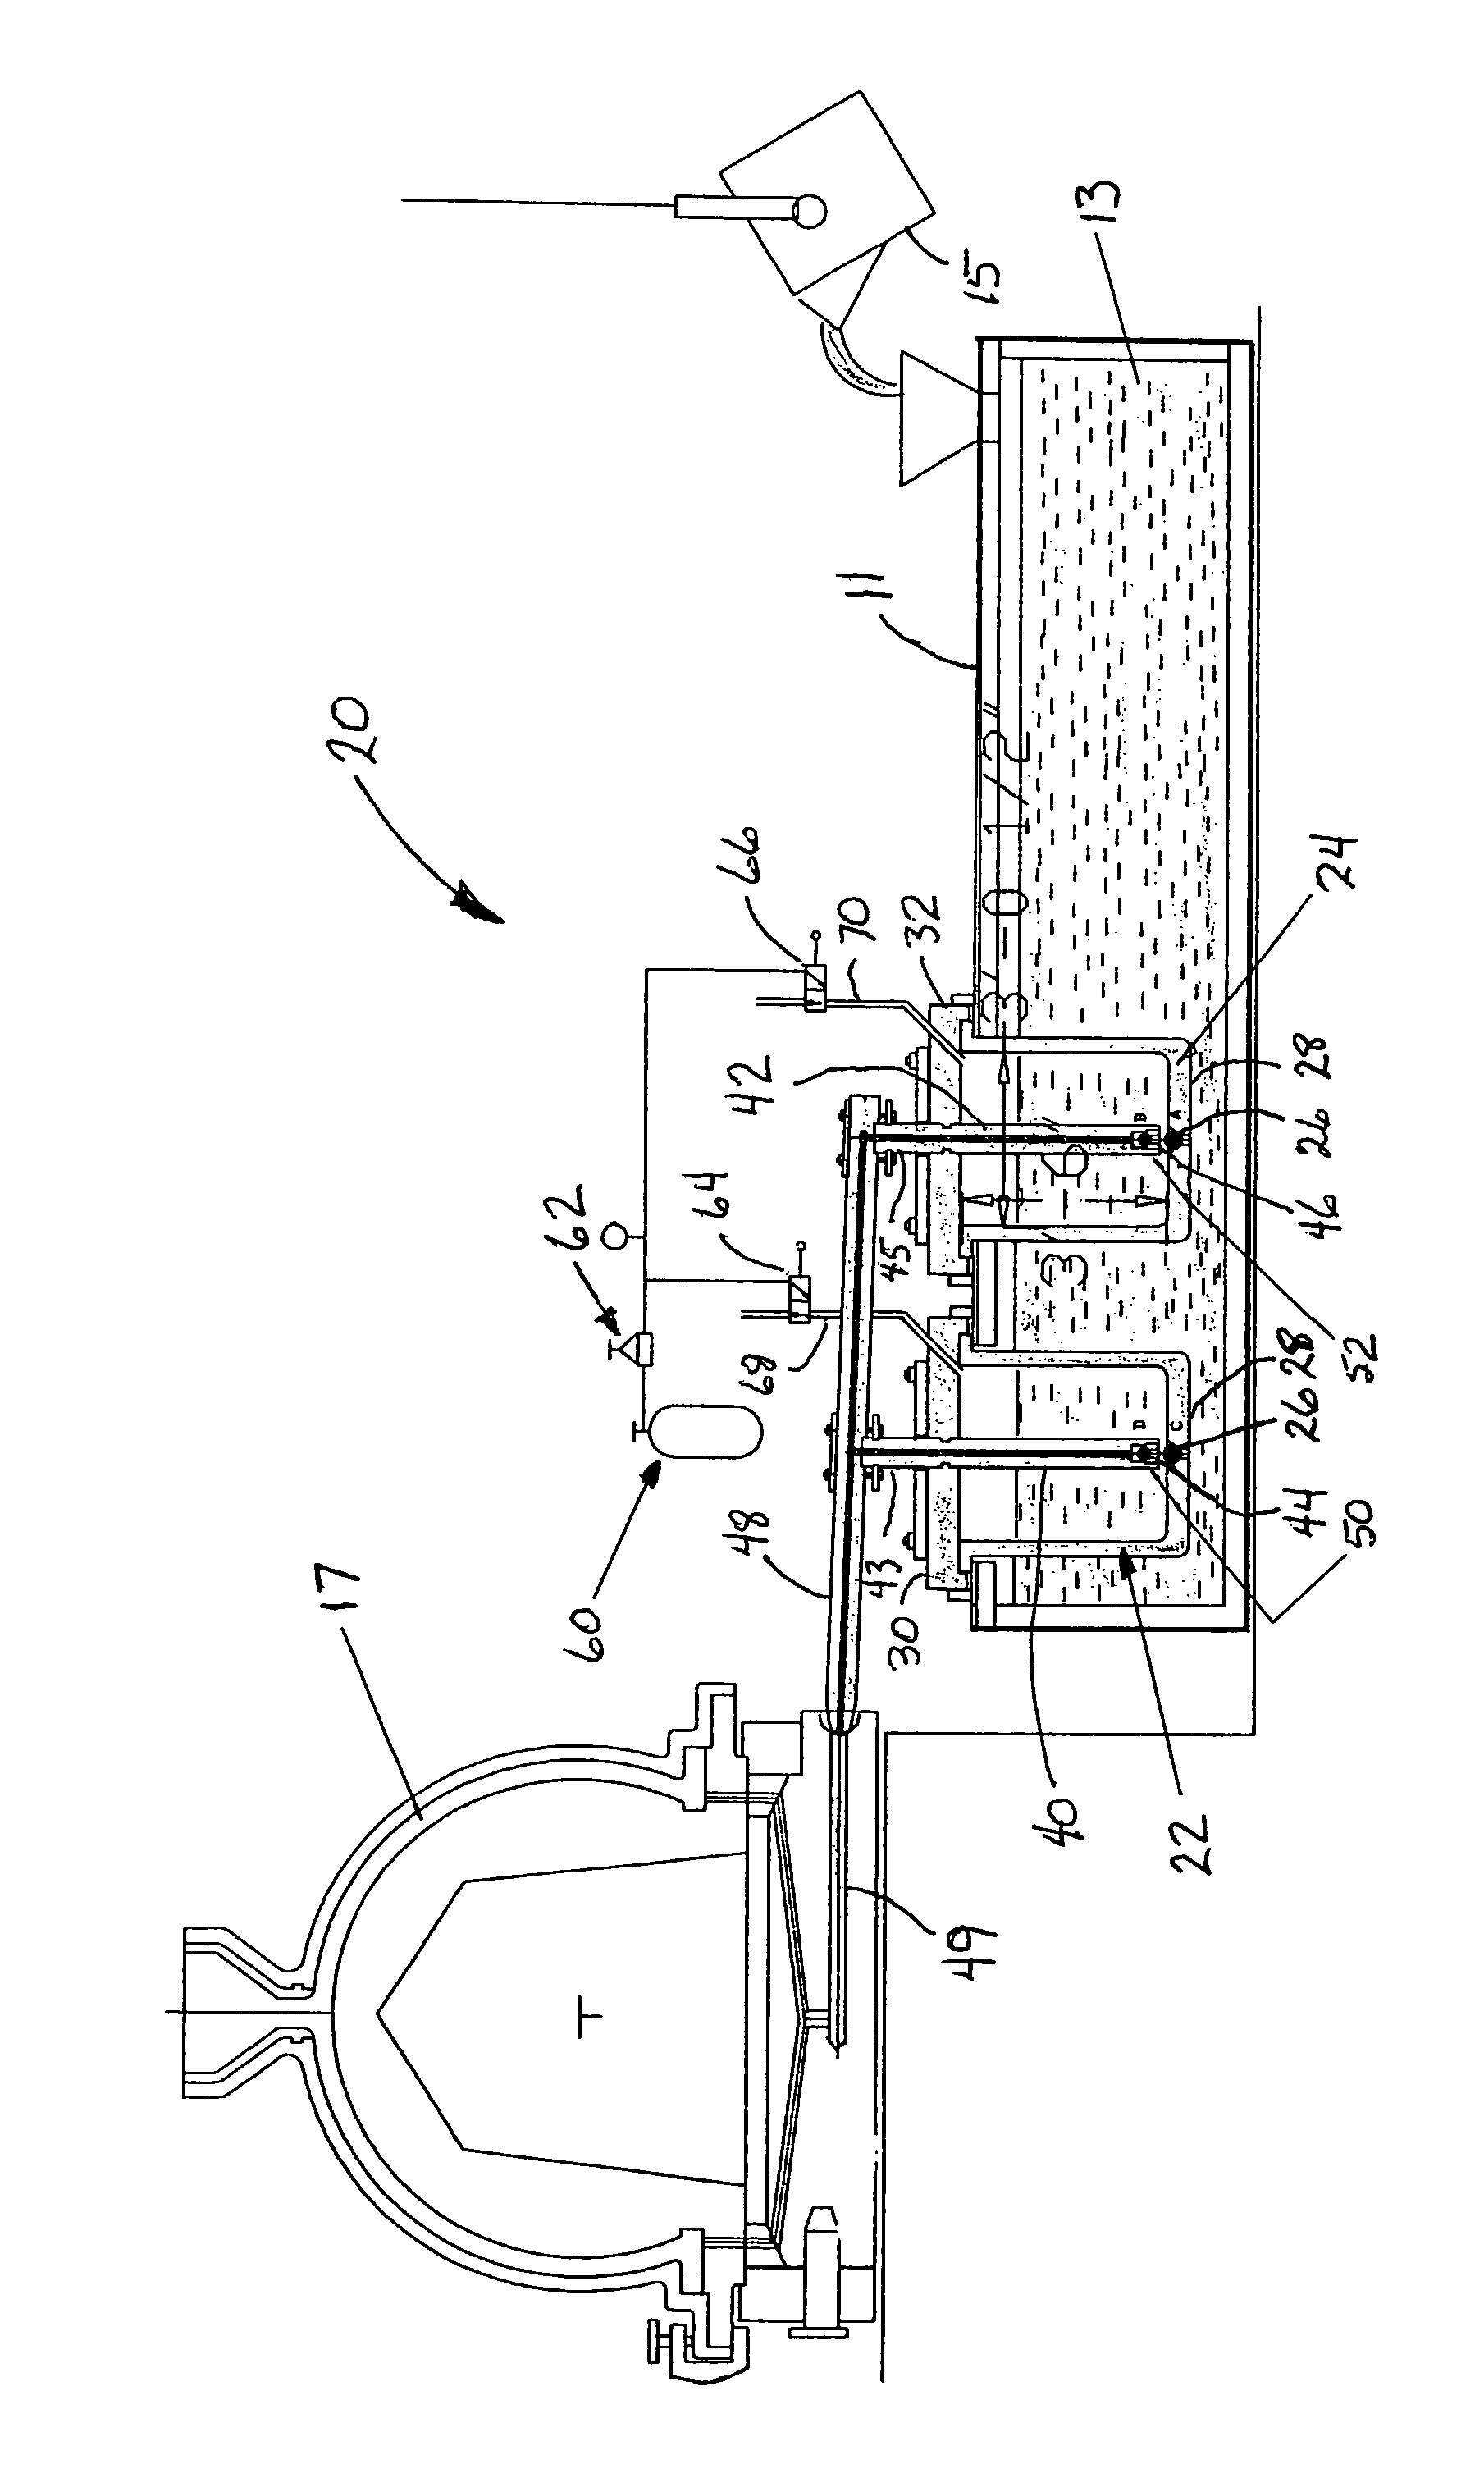 Method and system for pumping molten metal